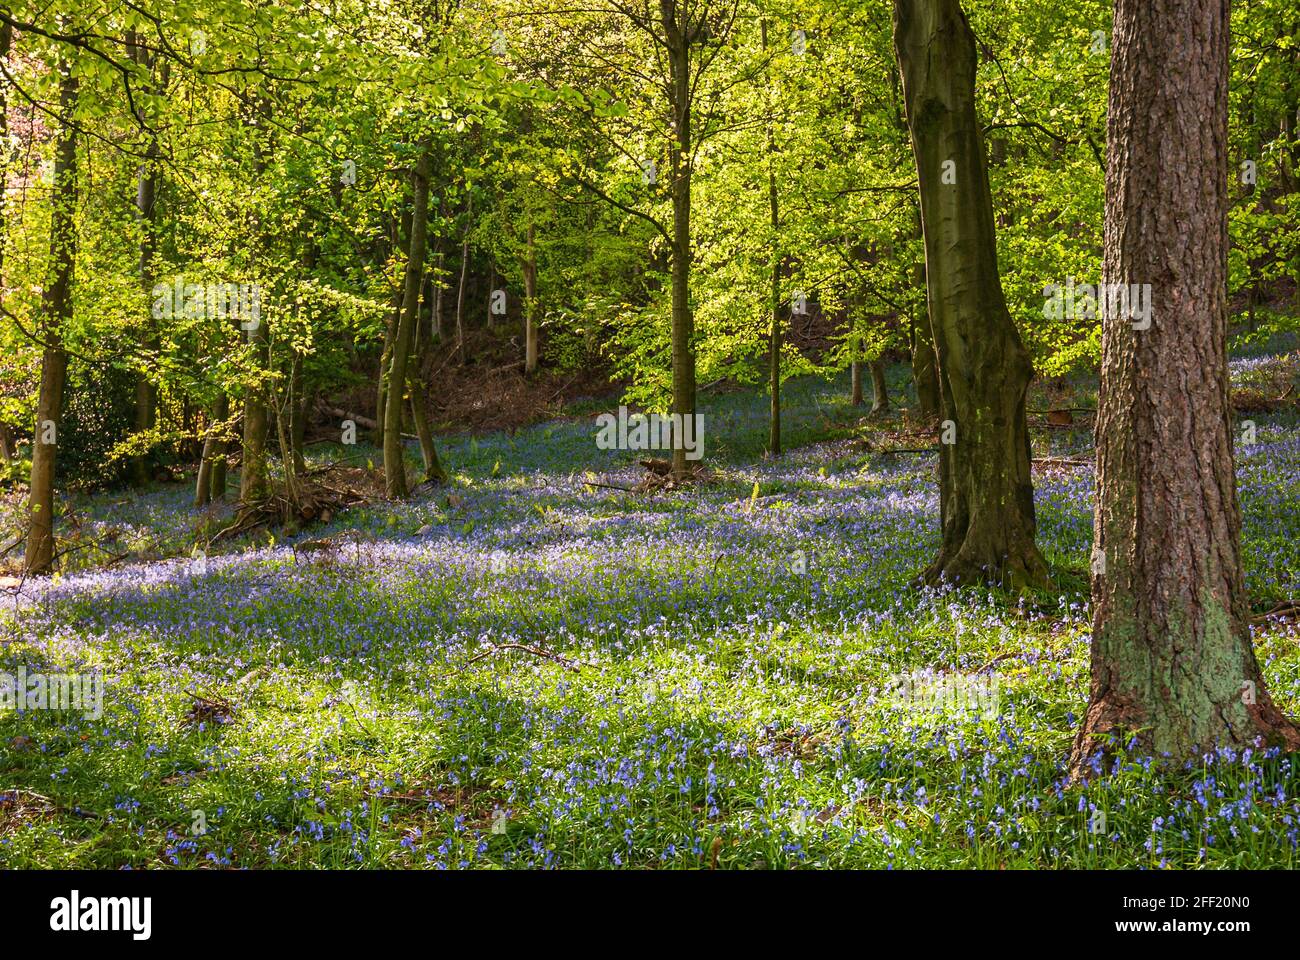 A sunlit, spring, 3 shot HDR image of the Bluebells, Hyacinthoides non-scripta in Stanley Wood, Duddon, Cumbria, England. 29 April 2007 Stock Photo